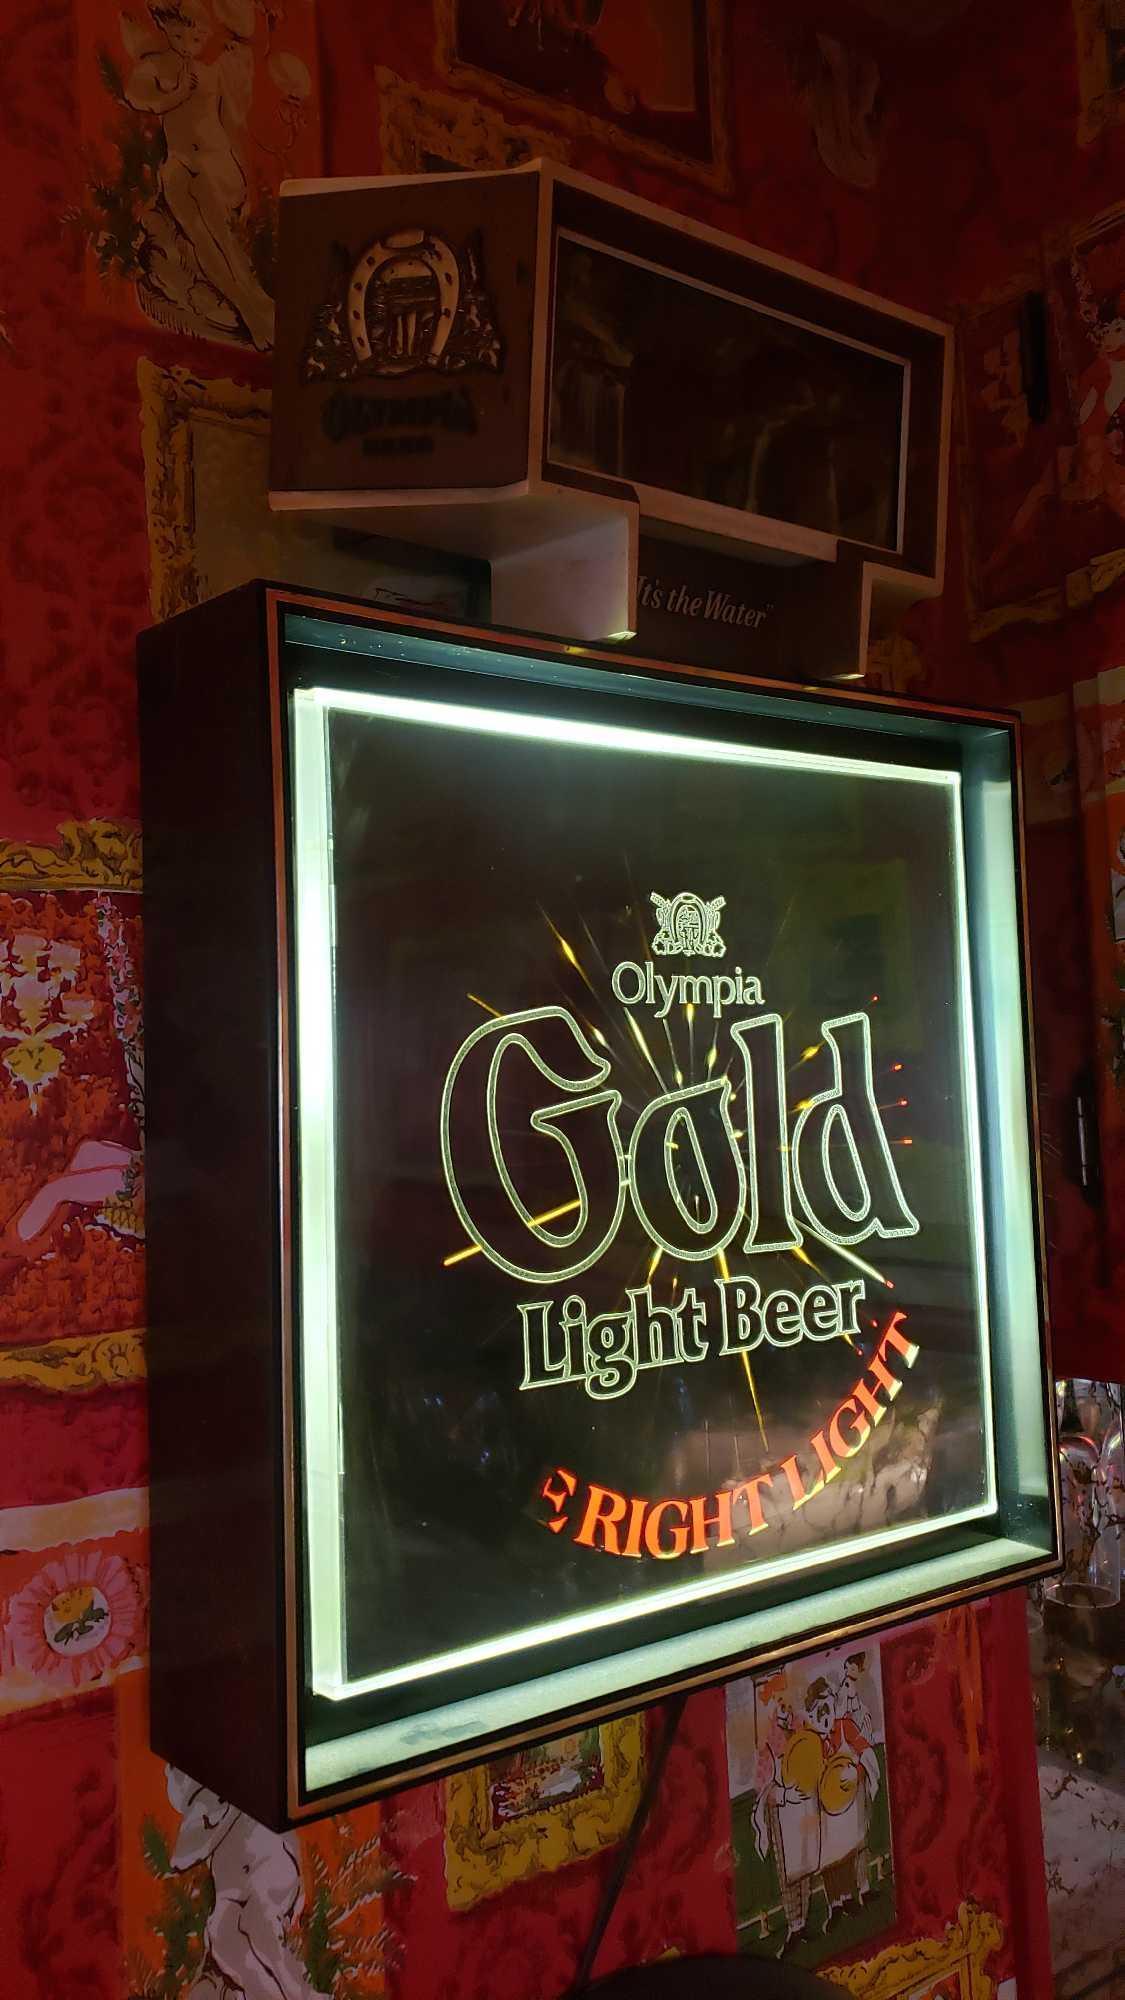 OLYMPIA BEER AND OLYMPIA GOLD LIGHT BEER SIGNS